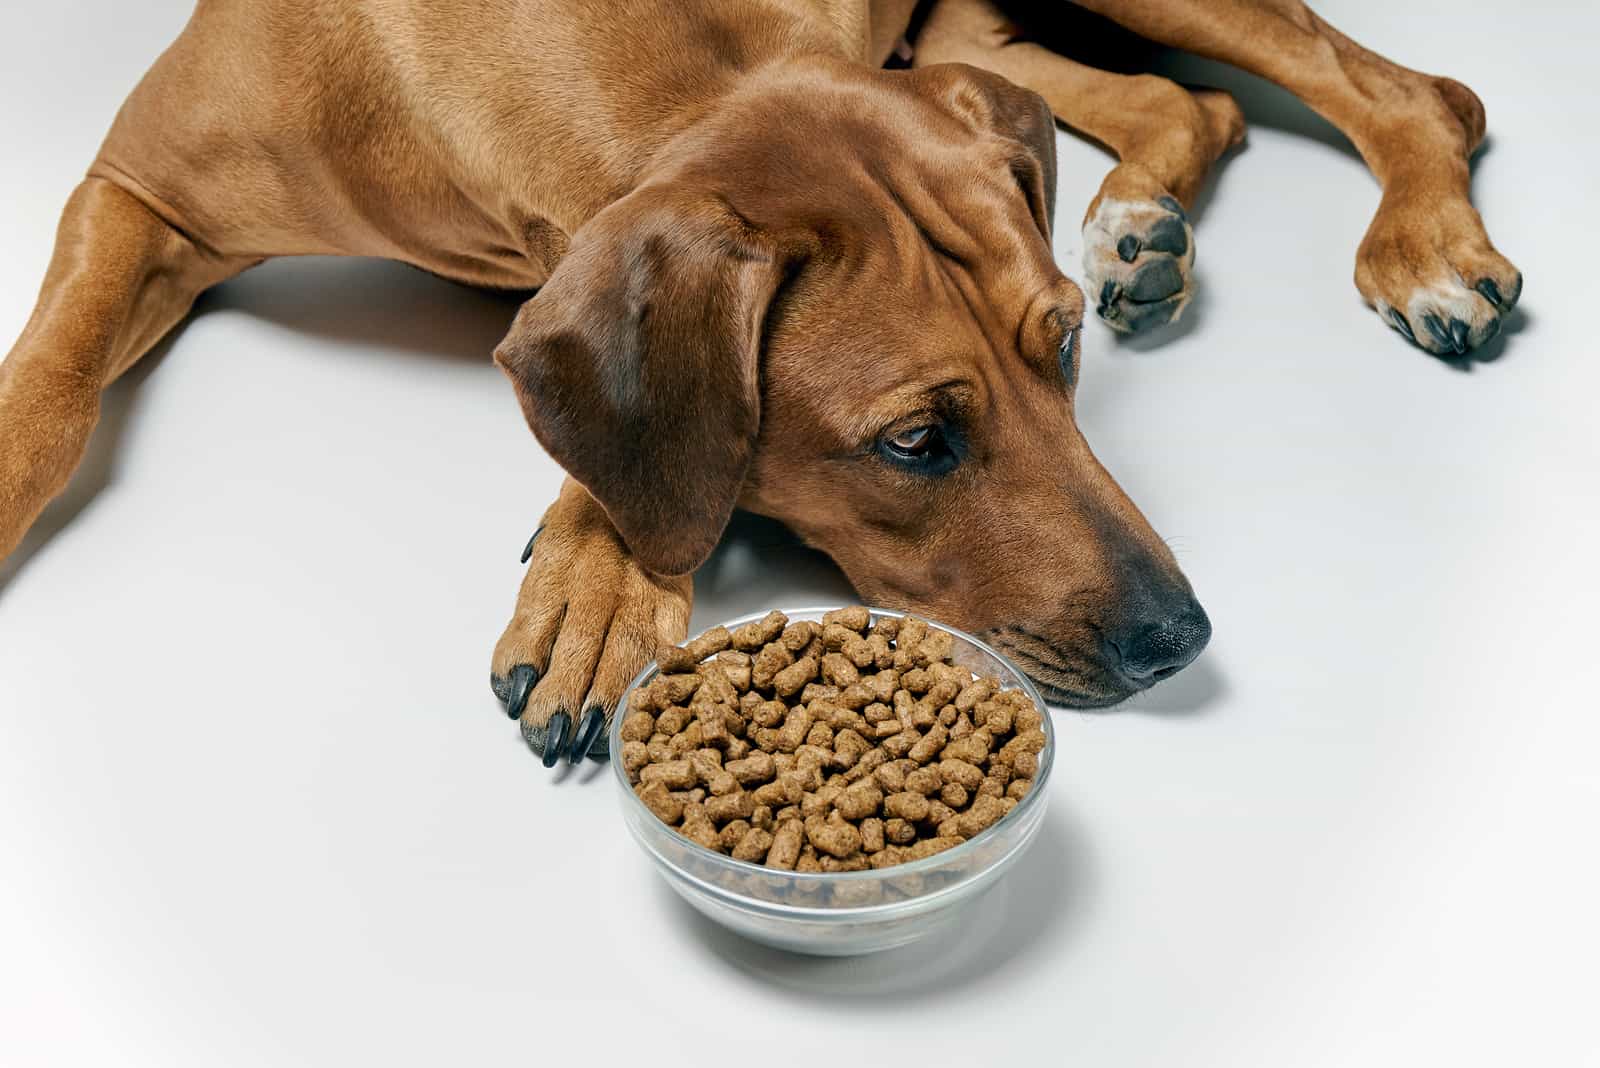 a sick dog with no appetite lies next to a bowl of dog food